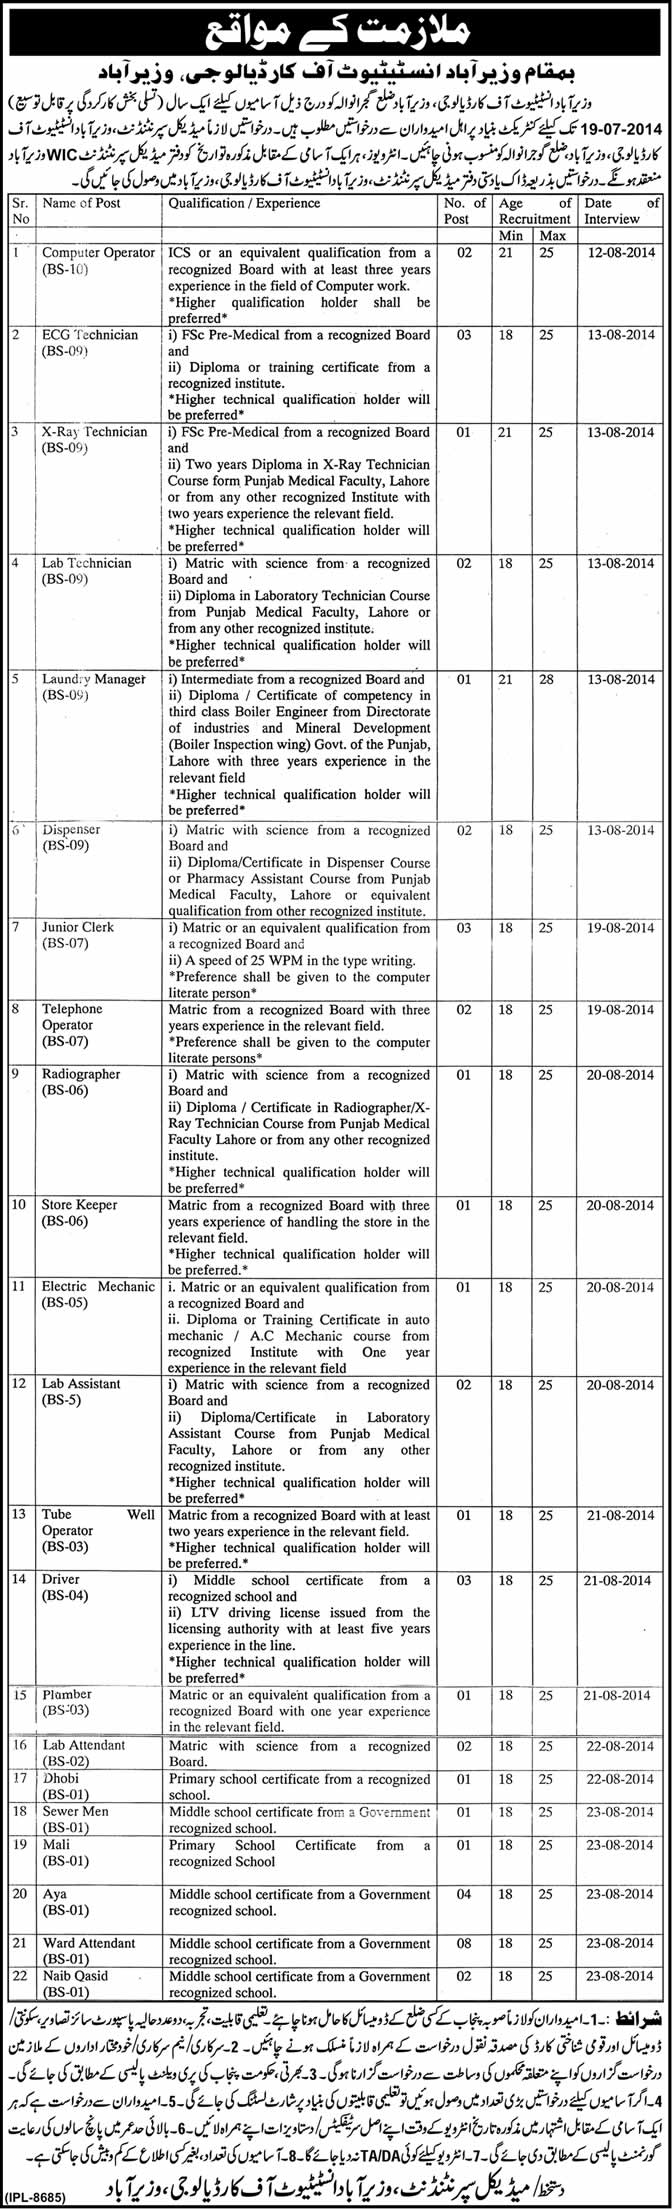 Wazirabad Institute of Cardiology Jobs 2014 July Latest Interview Schedule